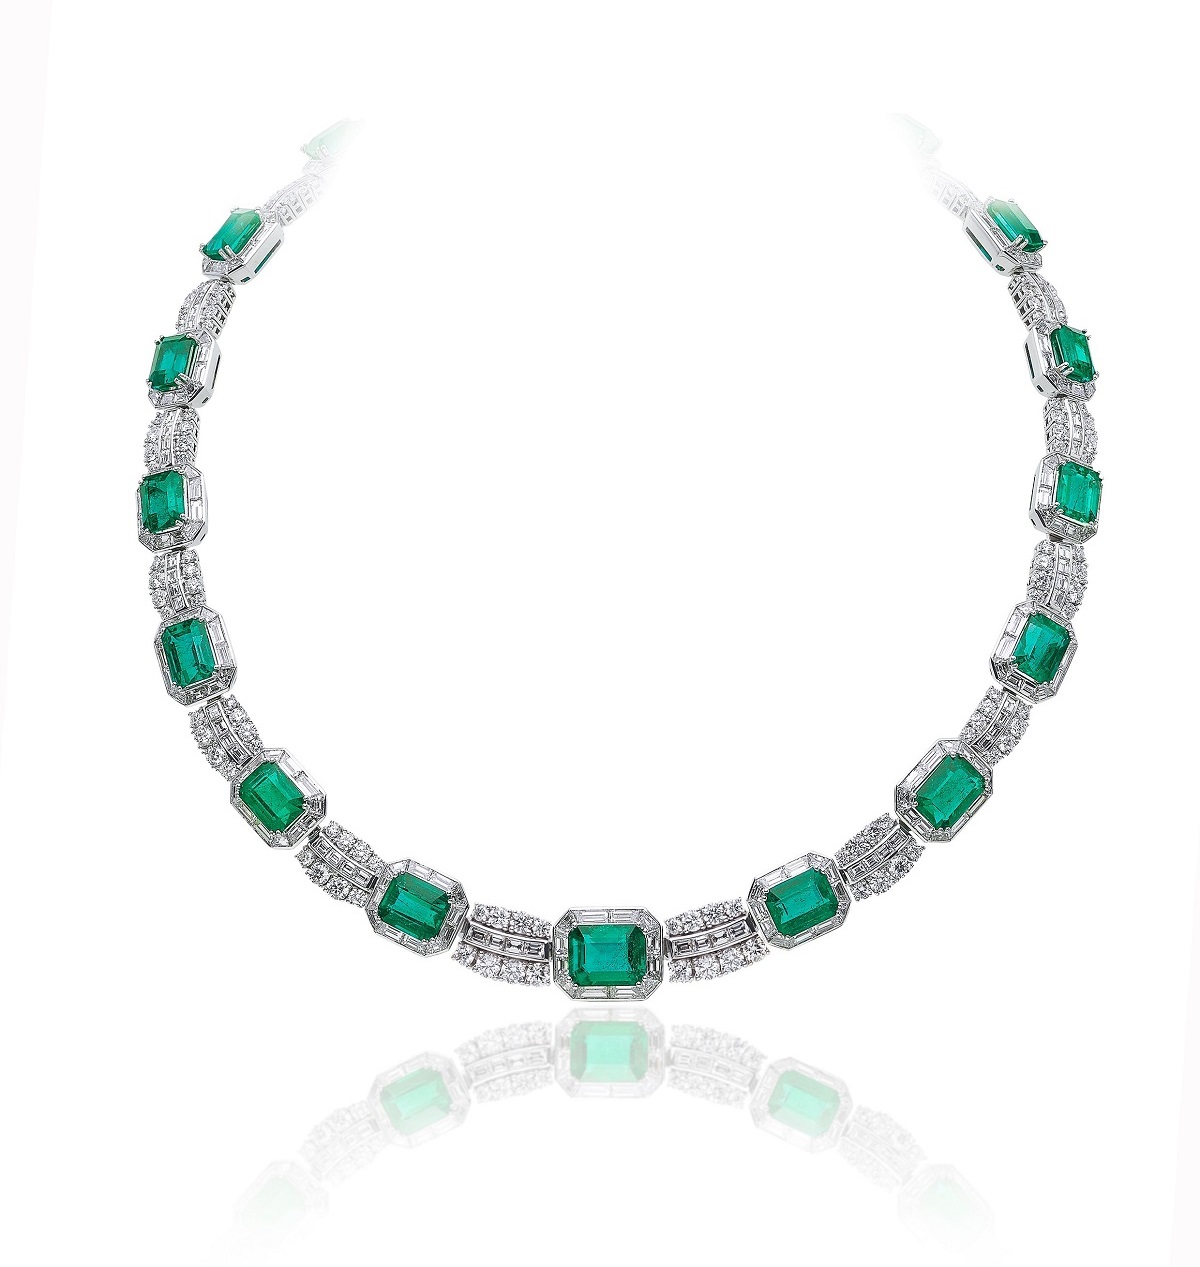 PICCHIOTTI “Masterpieces” Emeralds Gold Necklace with 45.91 carts of Emerald-Cut Emeralds, and 28.07 carats of Round and Baguette Diamonds. 